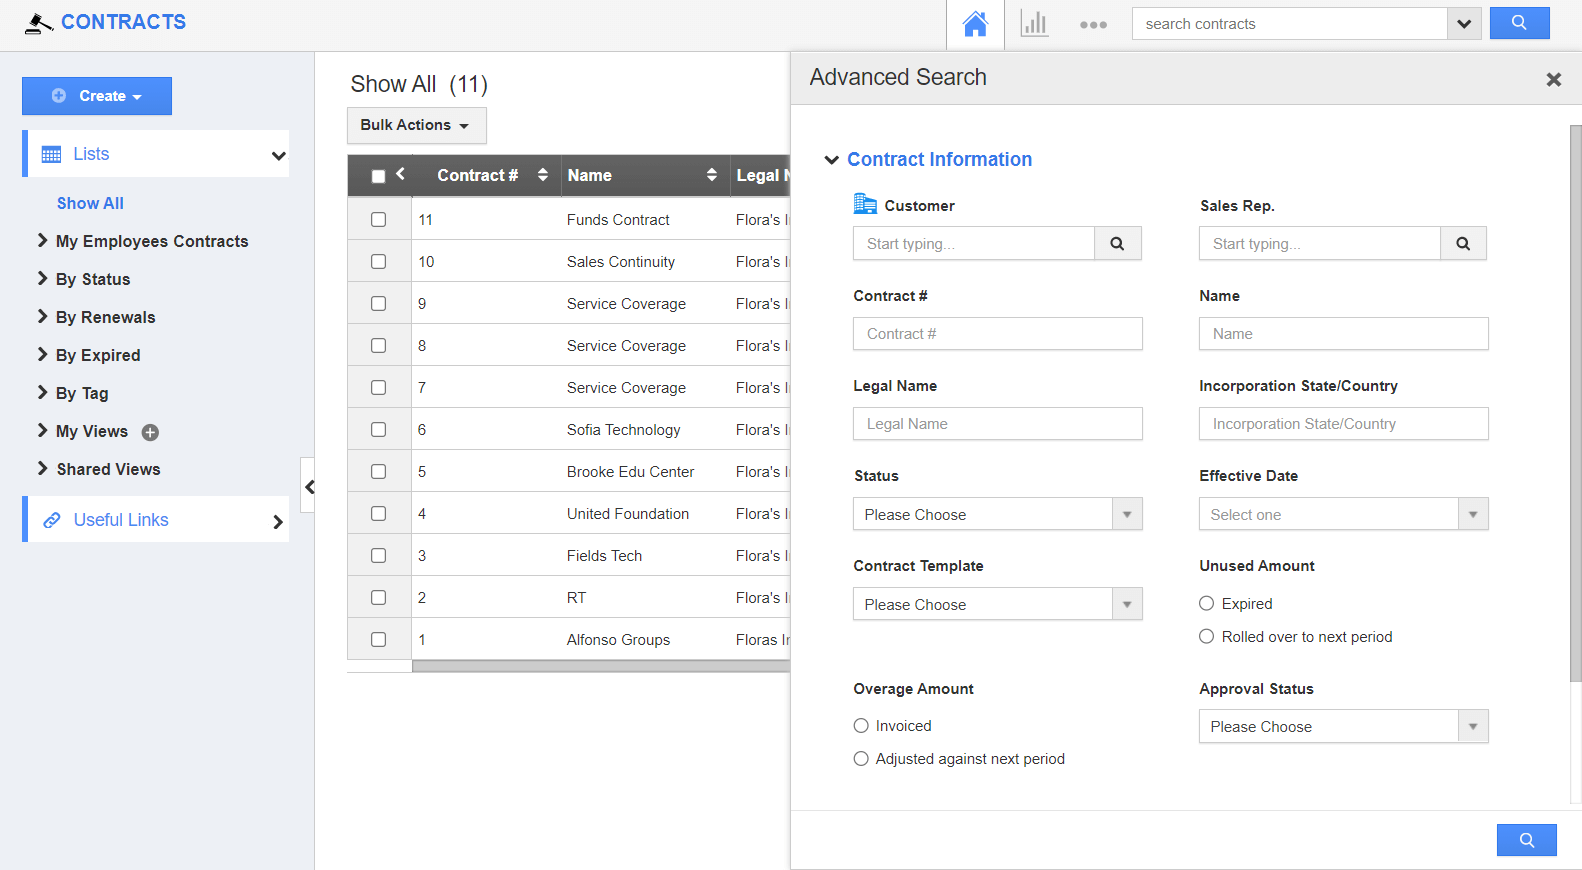 Contracts-App-AdvancedSearchSidePanel